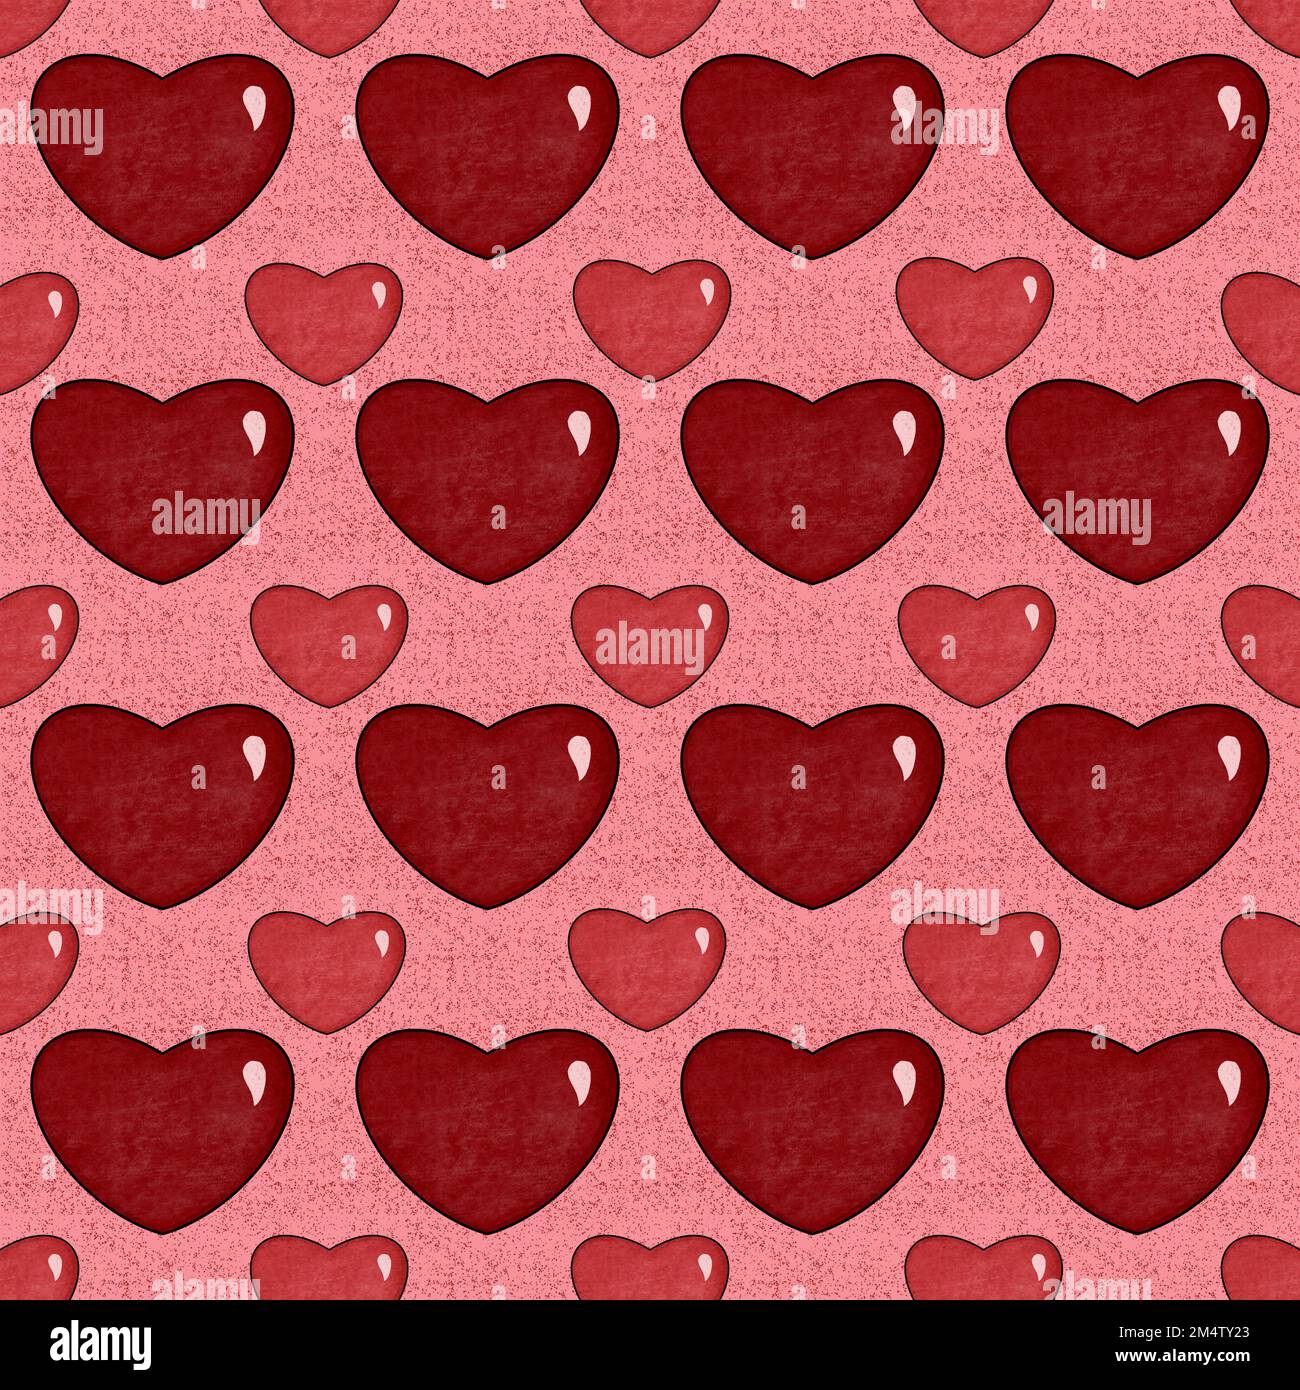 Textured 3d hearts seamless pattern. Hand drawn red shiny hearts on pink background. Cute modern Valentine’s Day decor. Raster illustration for fabric Stock Photo